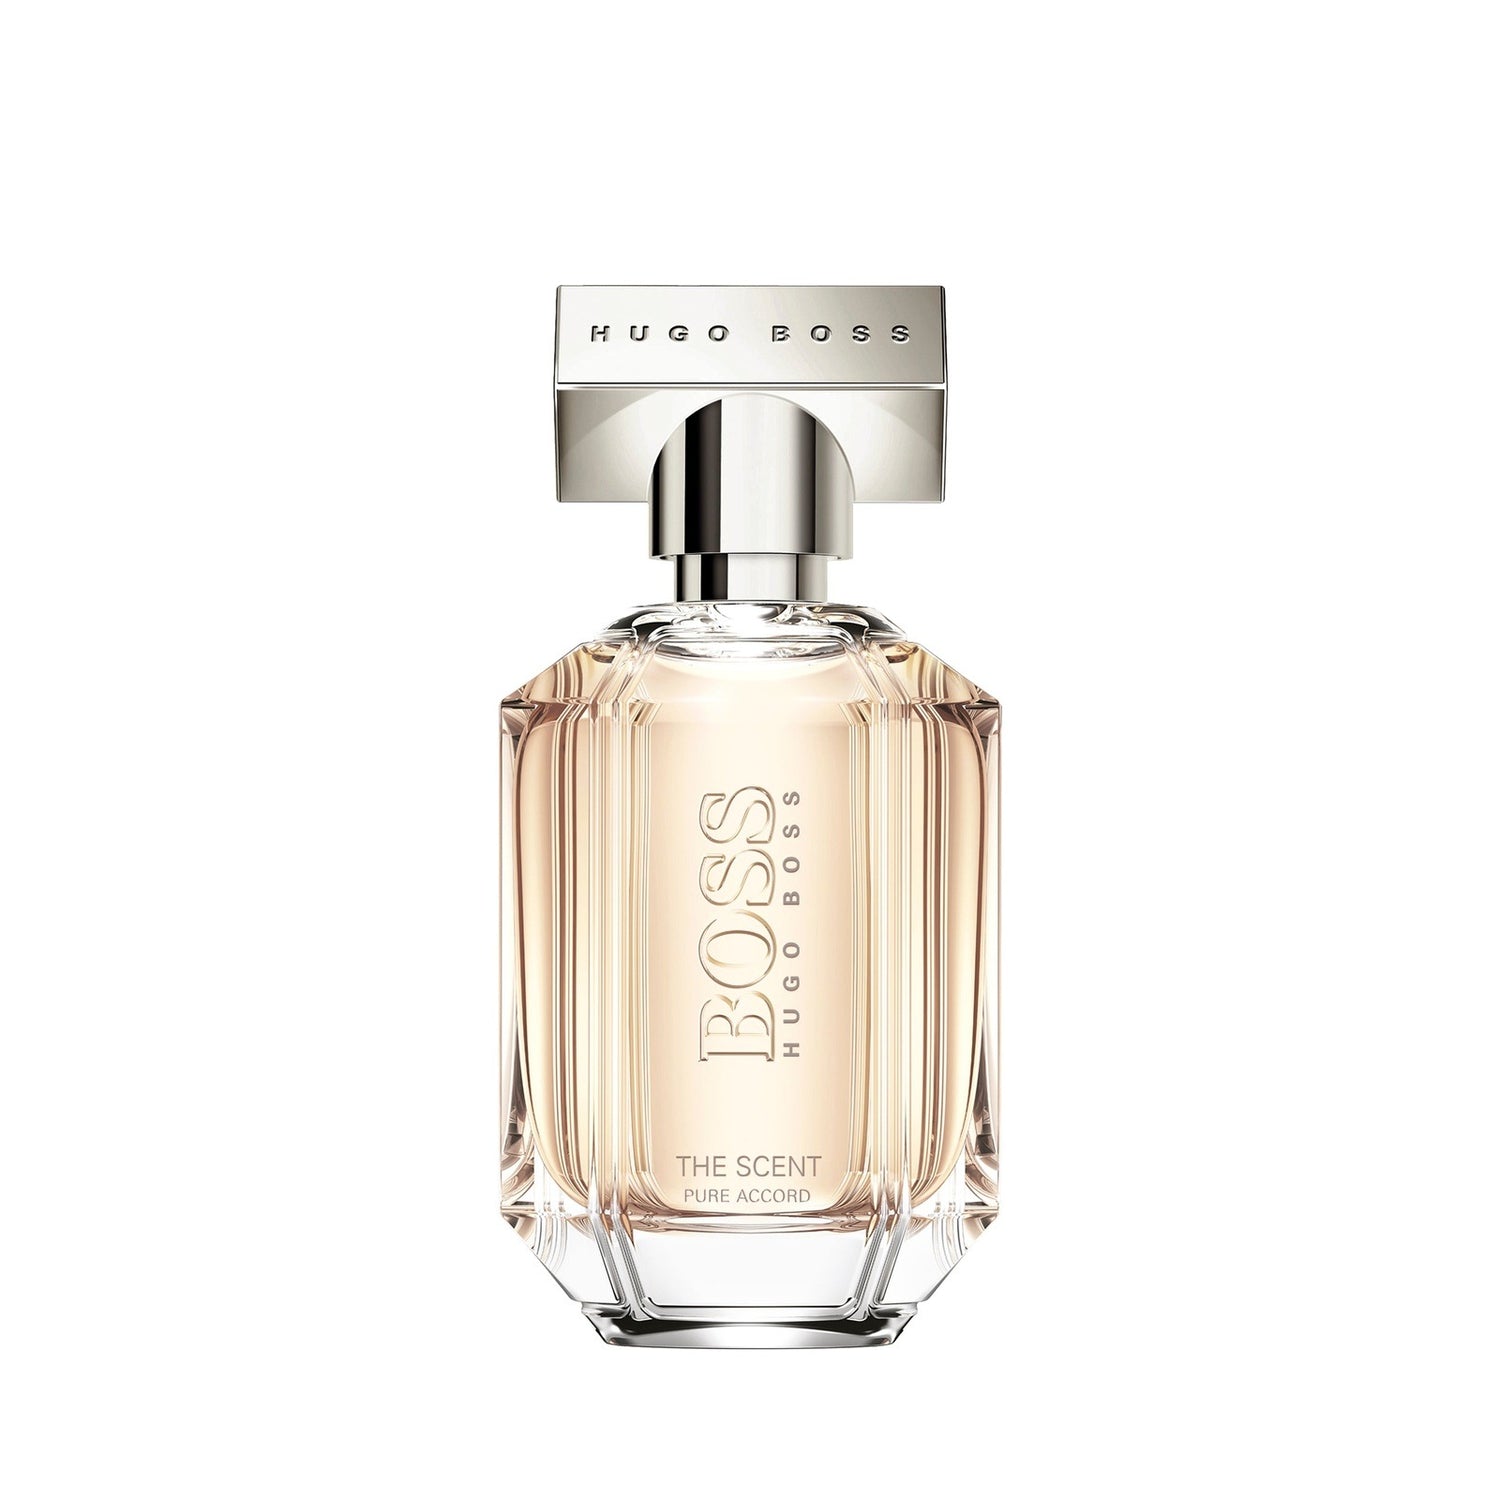 Hugo Boss The Scent Pure Accord for Her Eau de Toilette 50ml 2 Shaws Department Stores